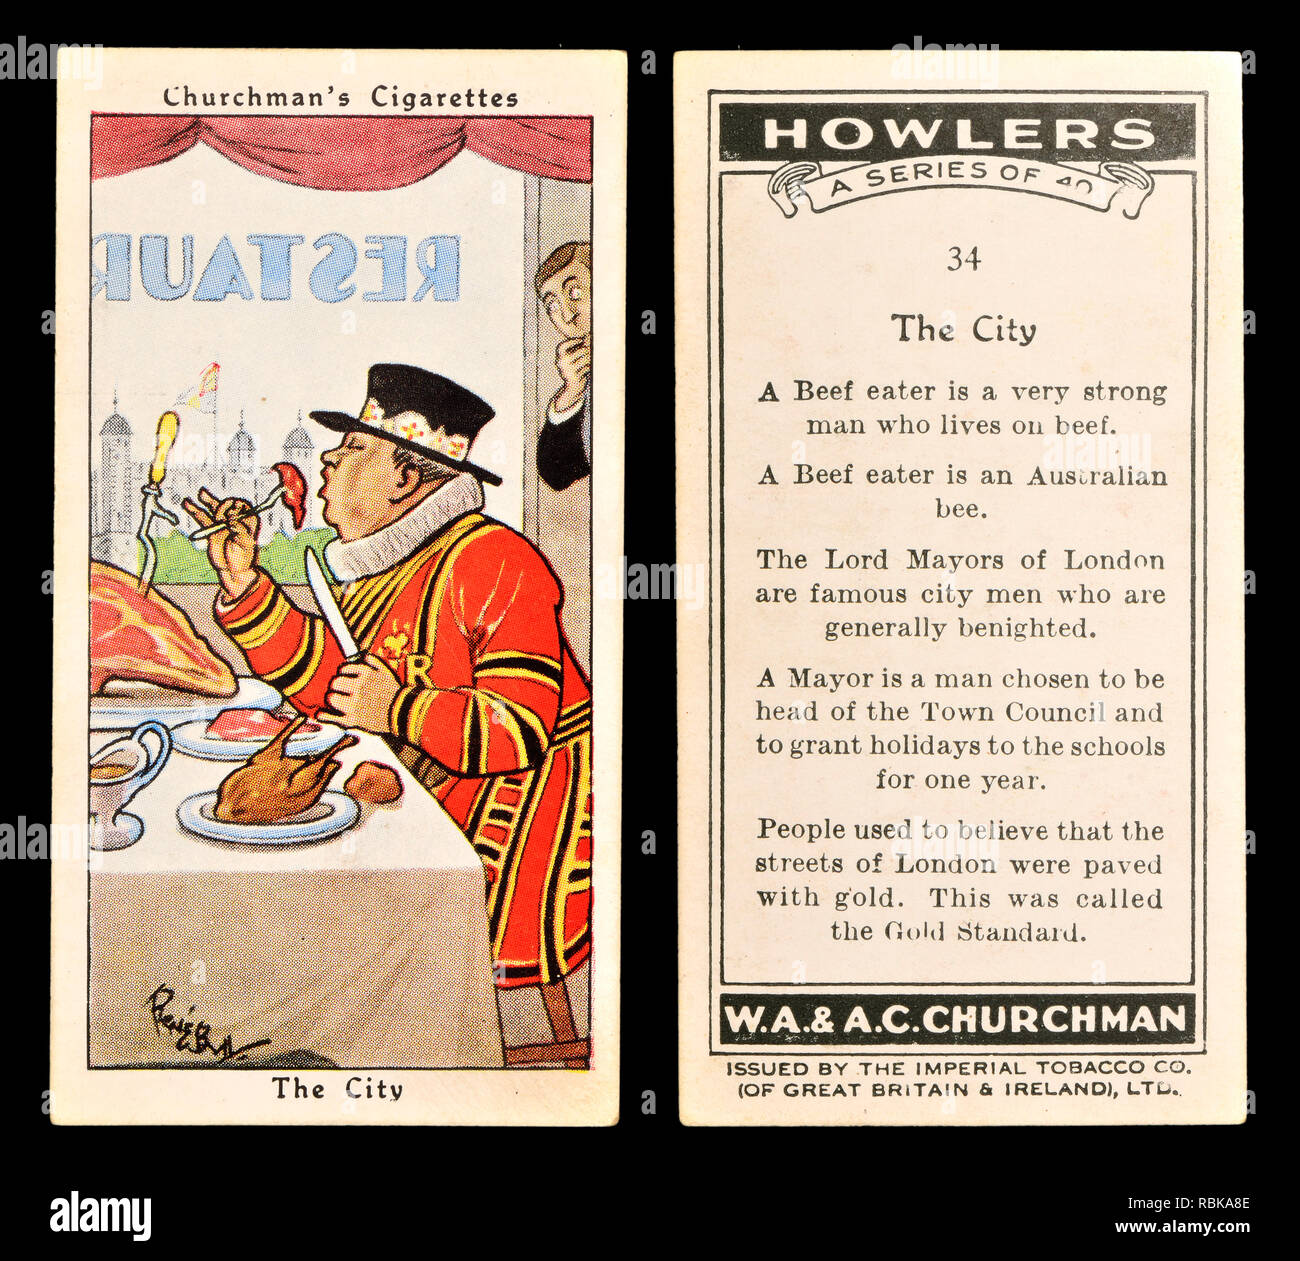 Cigarette card: Churchman's Cigarettes 'Howlers' series (1937) - the City / Beefeater Stock Photo